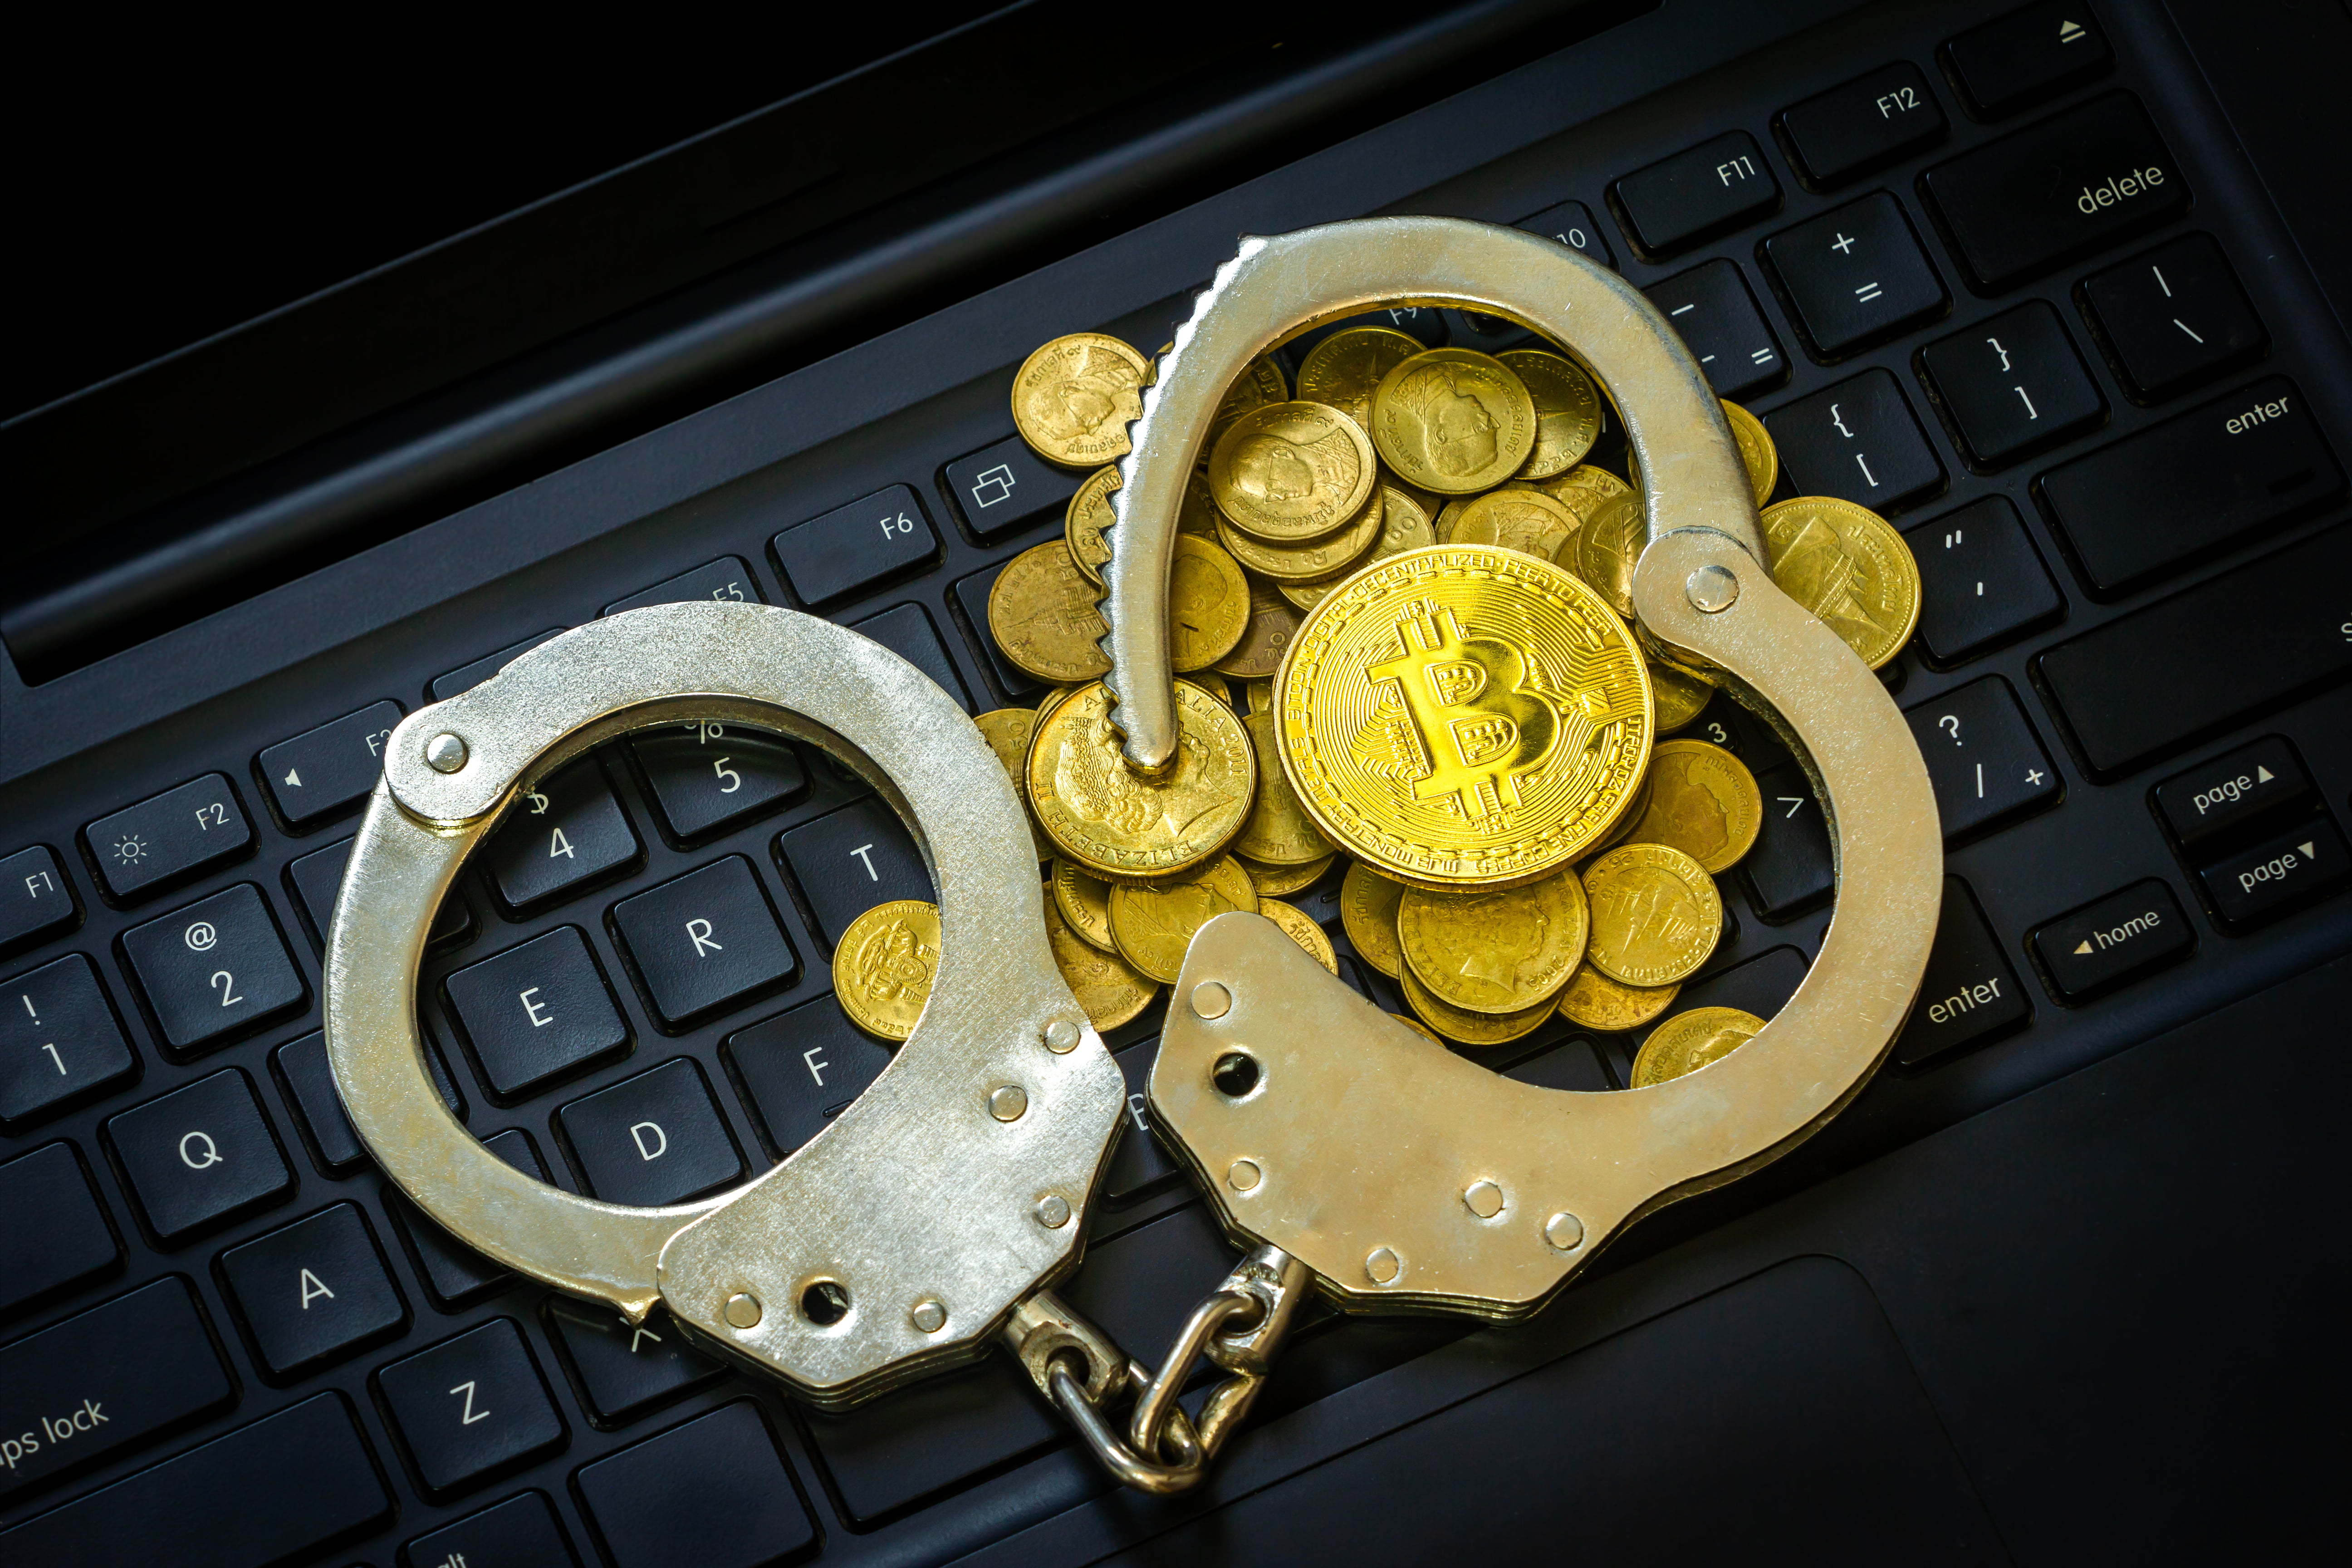 Yes, Criminals Use Bitcoin: They Also Use Cars, Cash, Mobile Phones, and the Web